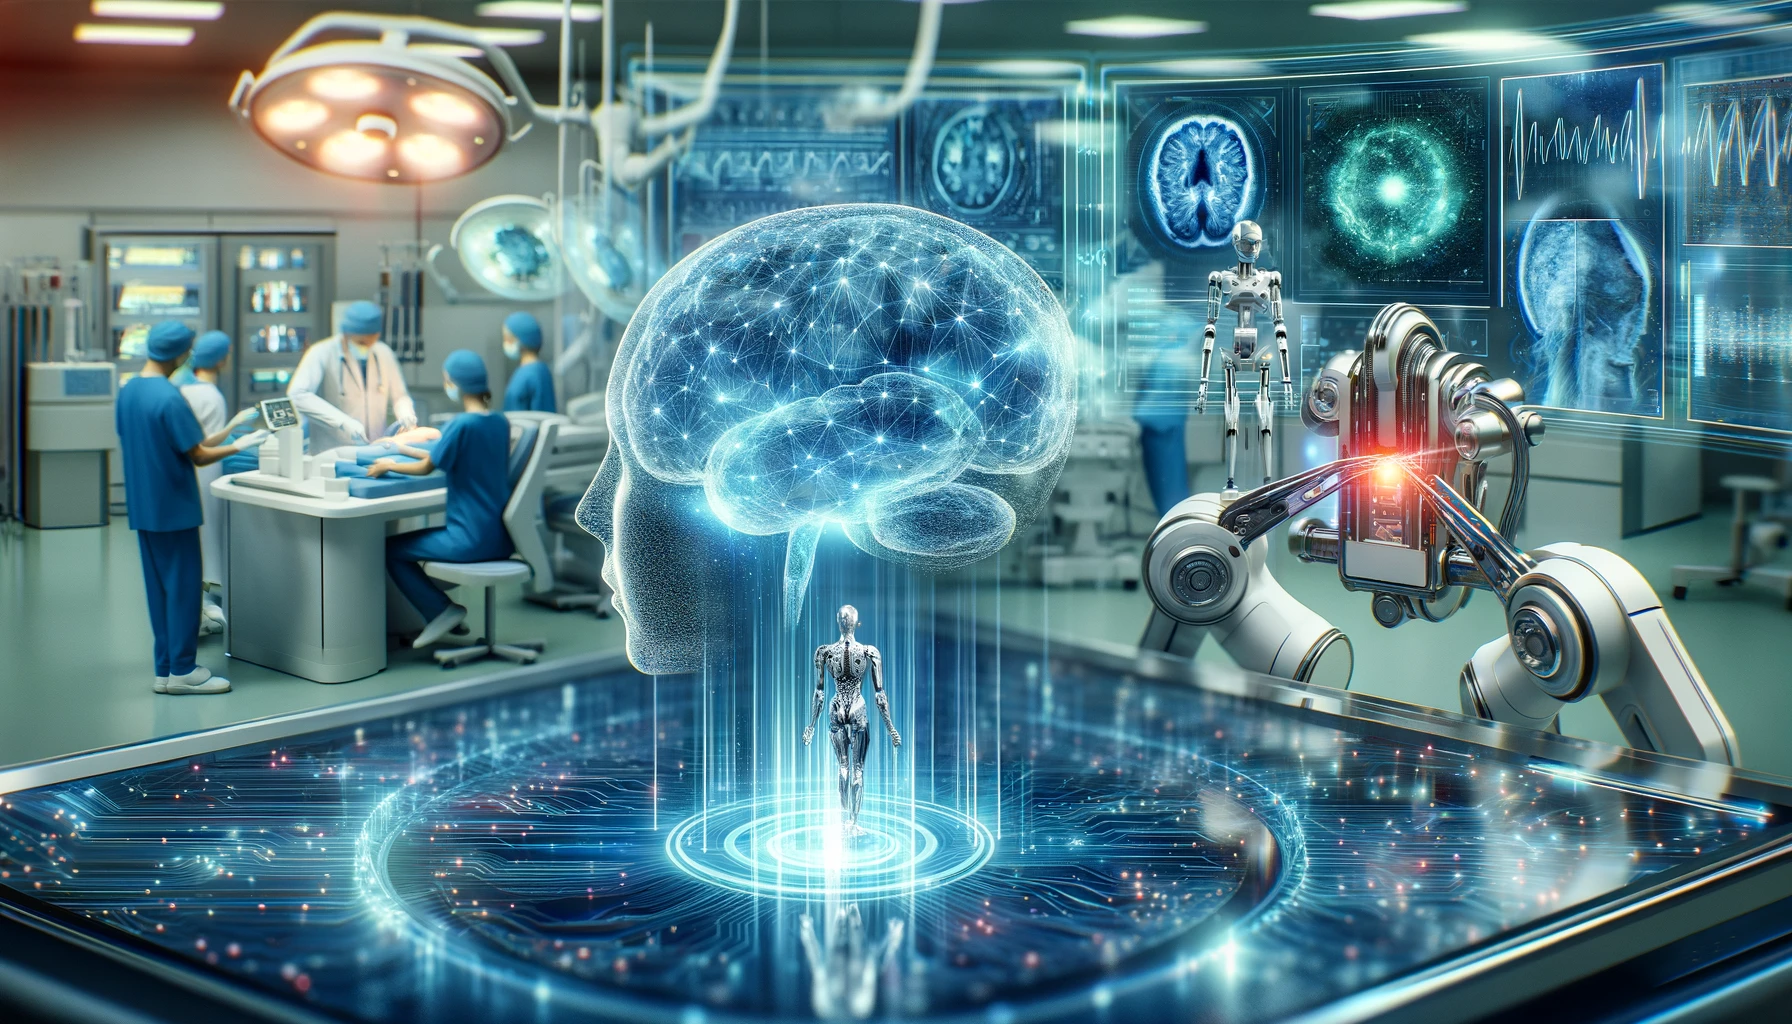 A futuristic concept of a medical facility enhanced with advanced artificial intelligence technology, featuring a robotic arm performing a procedure, holographic displays of human anatomy, and medical staff engaged in surgery. The central focus is a luminous, holographic human brain, symbolizing the integration of AI in neurological studies and healthcare innovations.